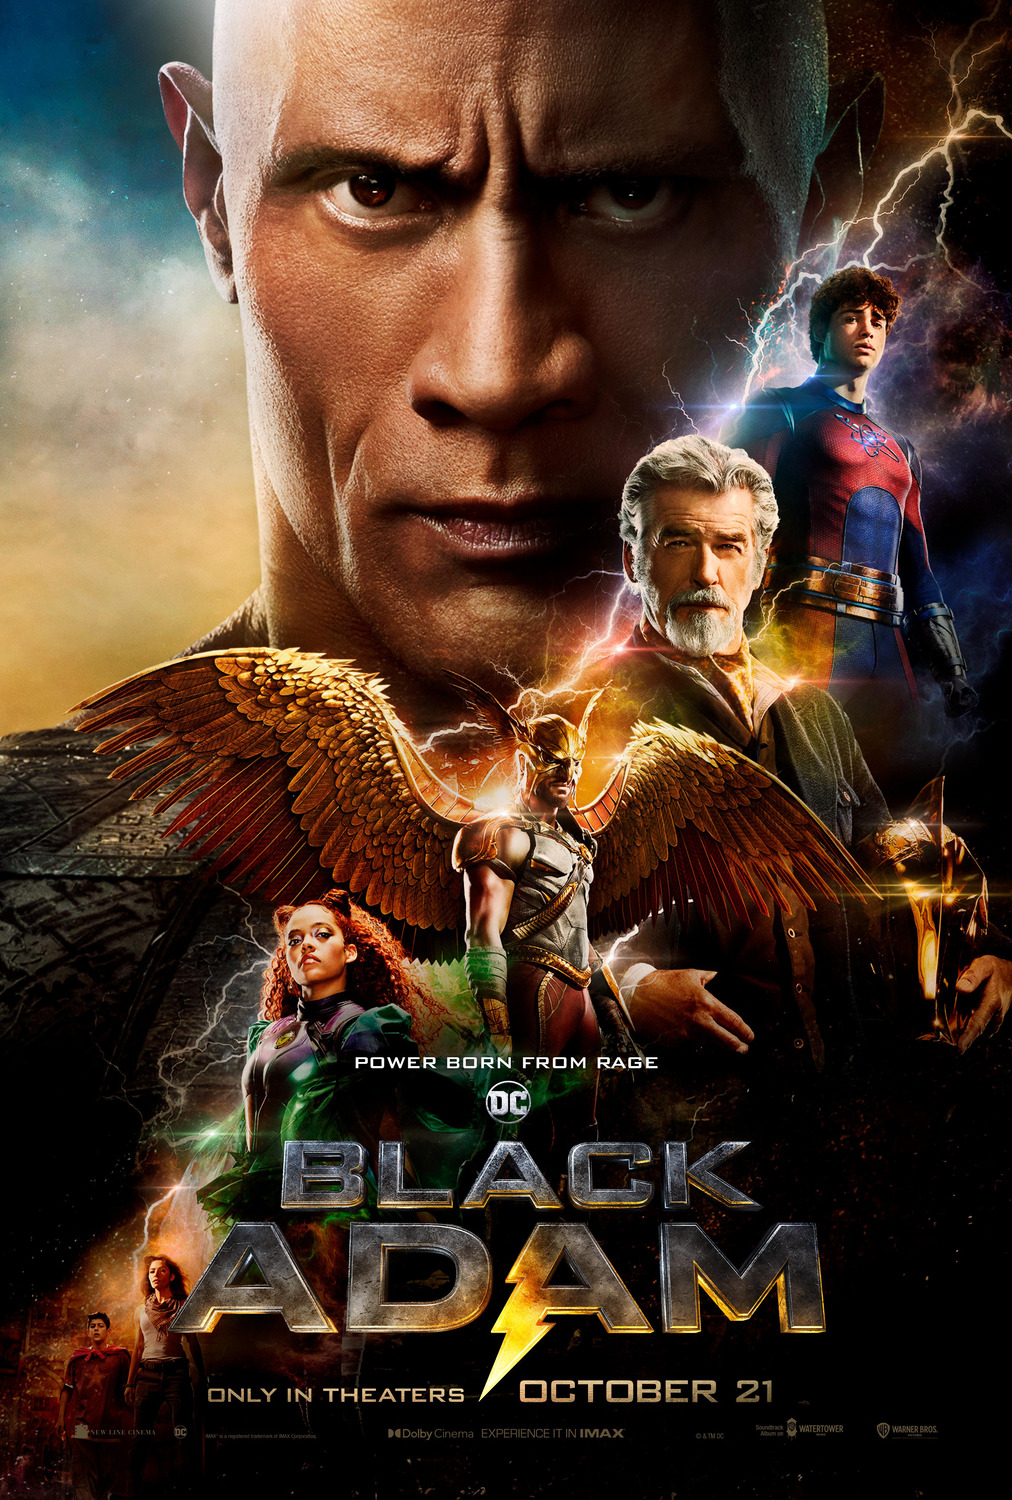 Several floating heads form a diagonal line across the poster. Dwayne Johnson's head sits in the background behind the members of the Justice Society of America.